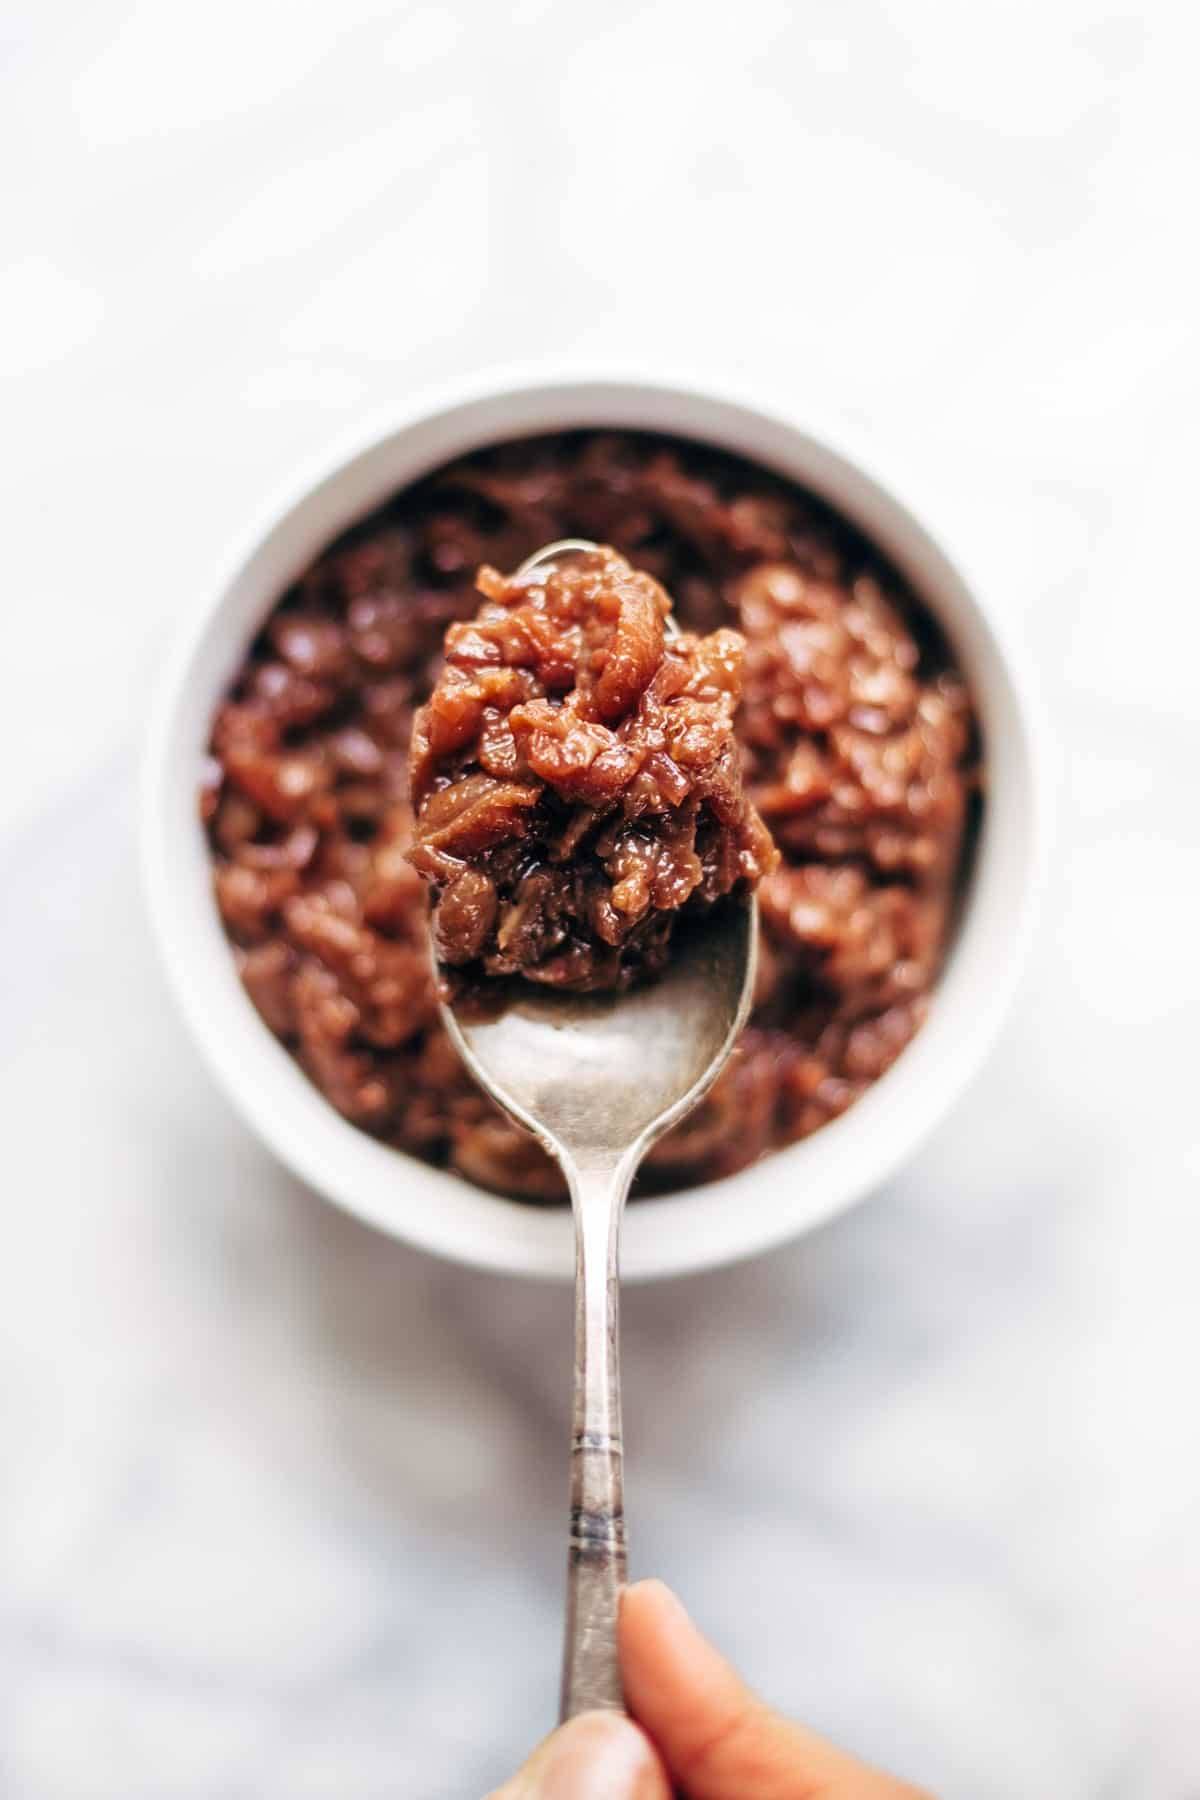 Caramelized Shallot and Grape Chutney! Made with shallots, grapes, red wine, cinnamon, bourbon, and vinegar. So good with plate of crispy crackers! | pinchofyum.com